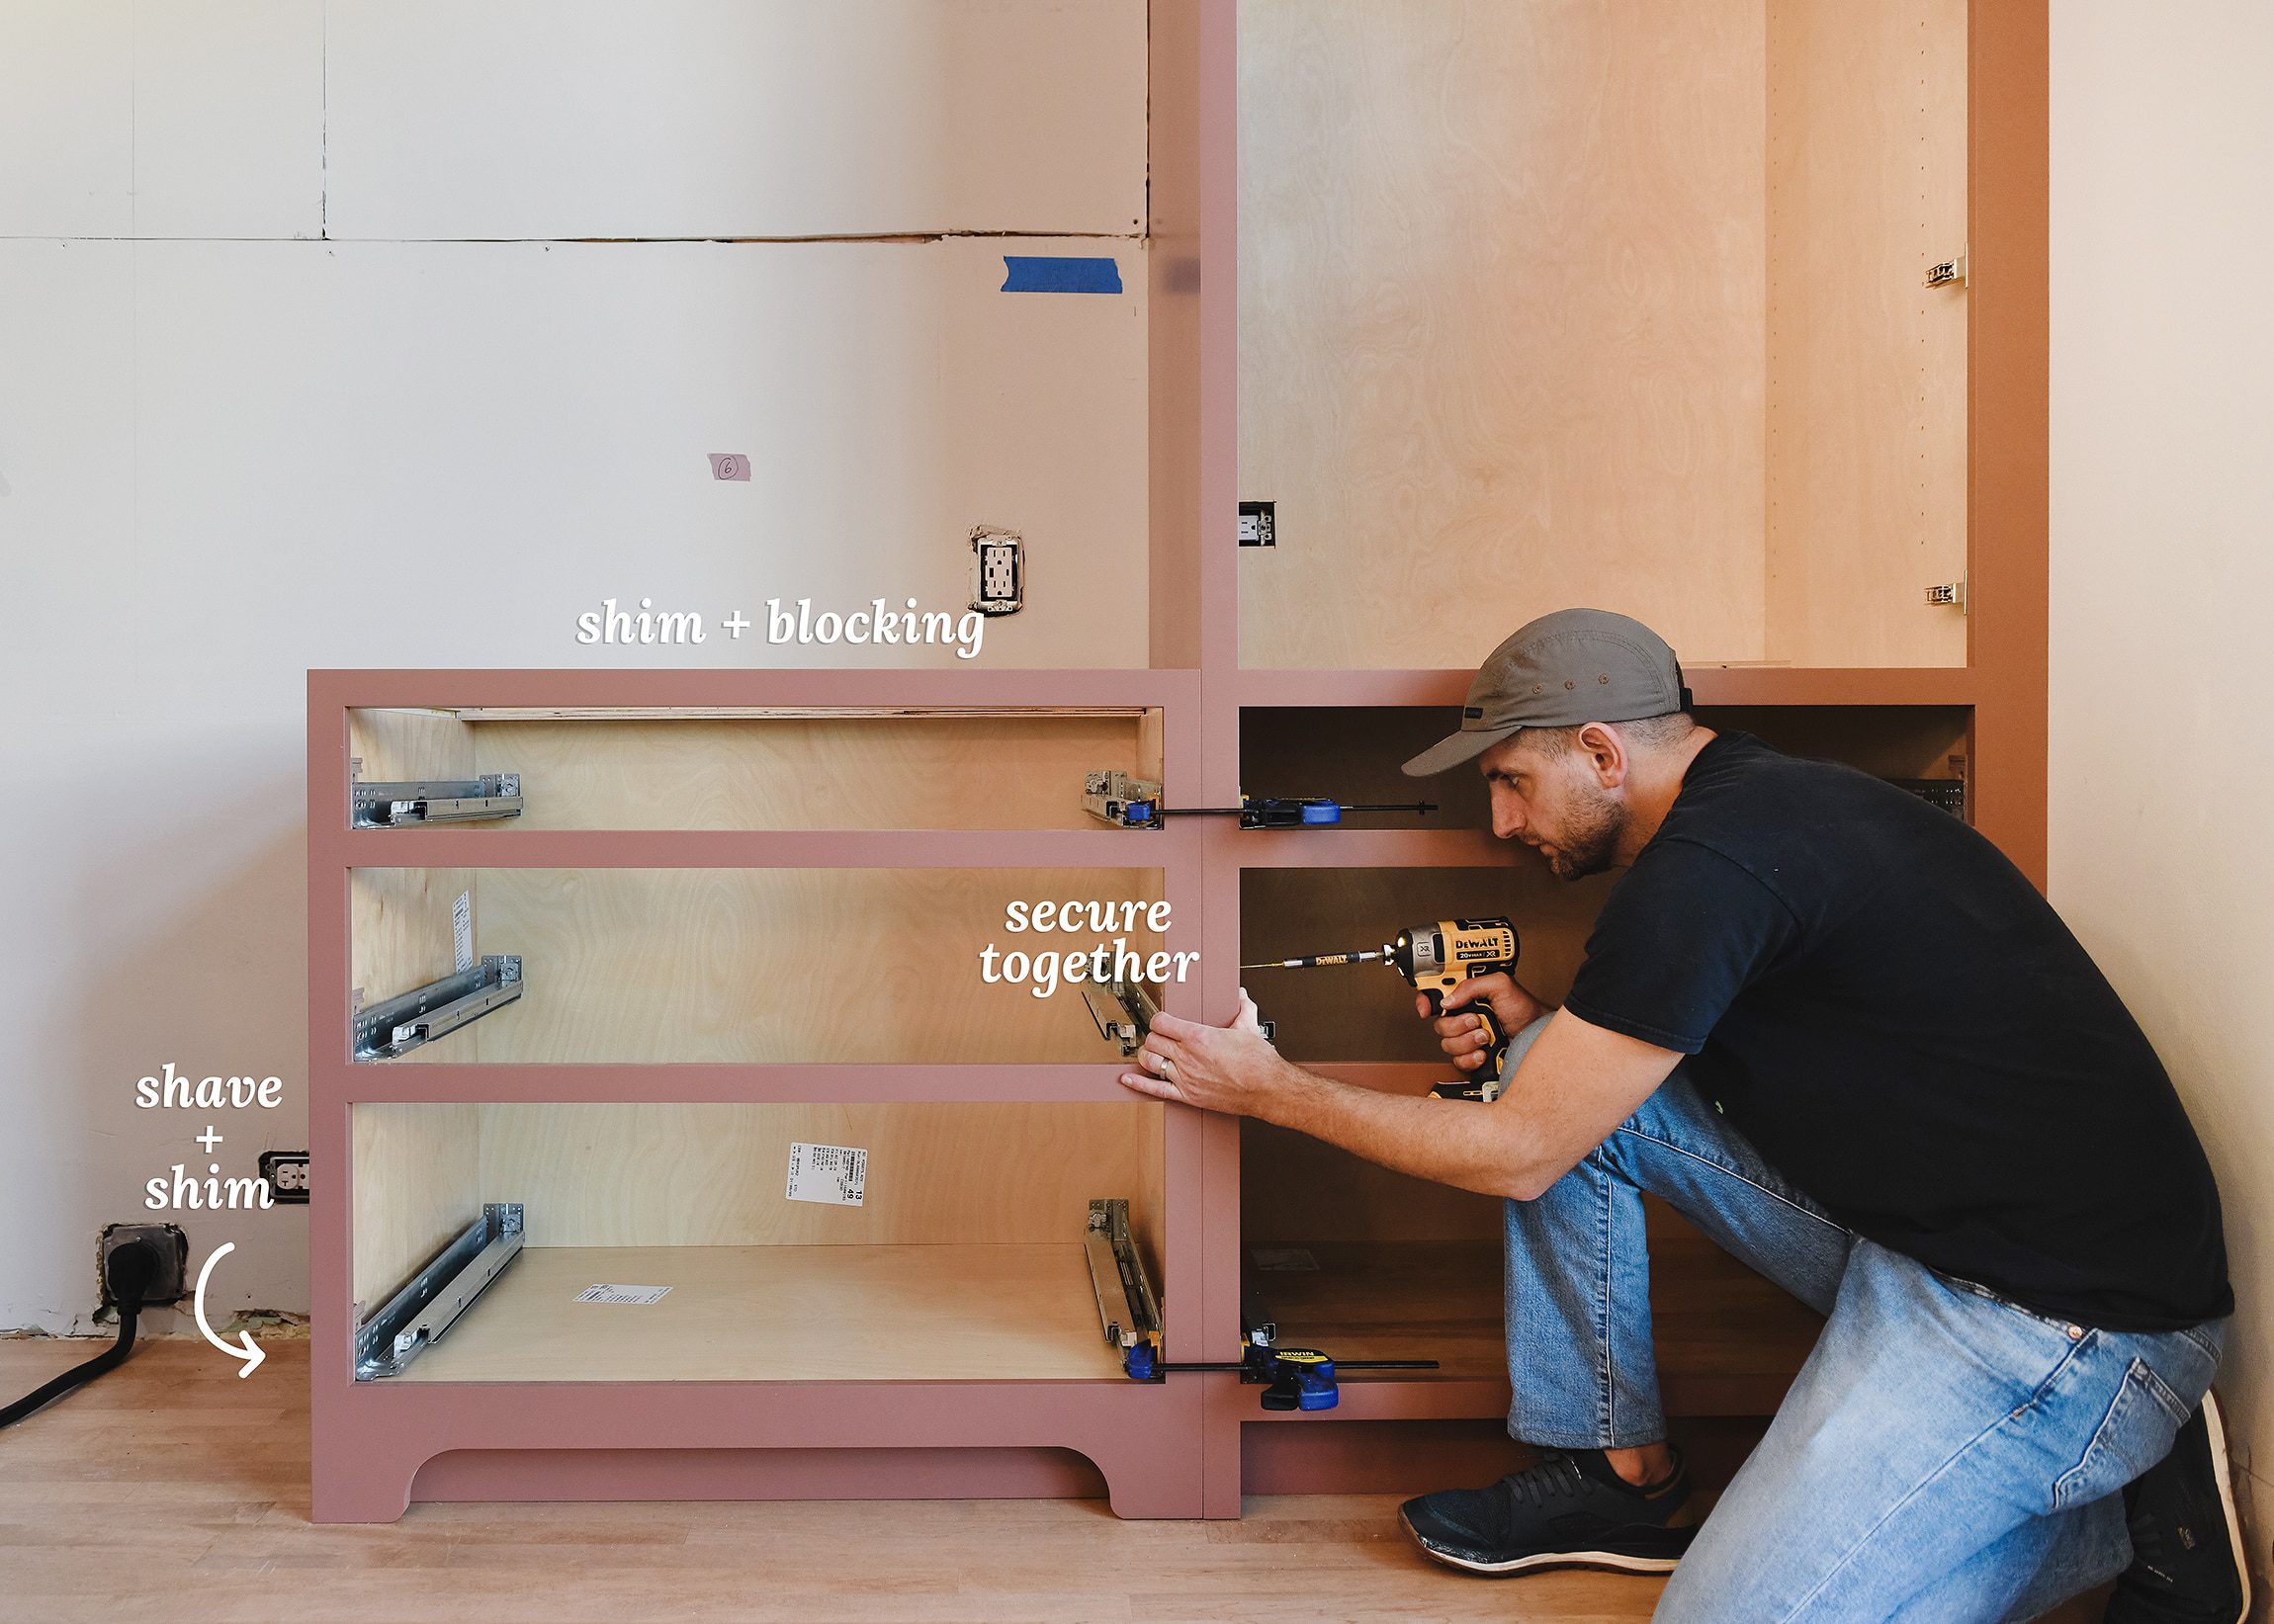 Scott joins two cabinet face frames together with specialty screws // via Yellow Brick Home